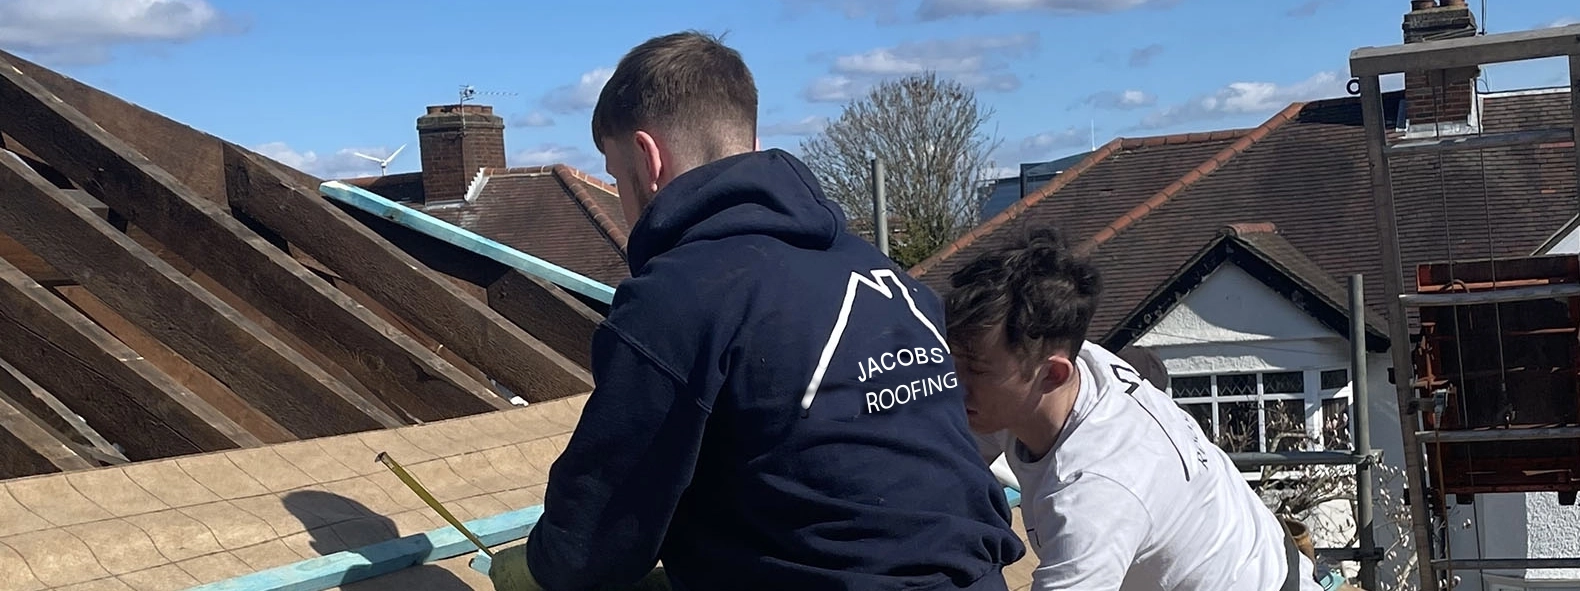 Jacobs Roofing Services Ltd.